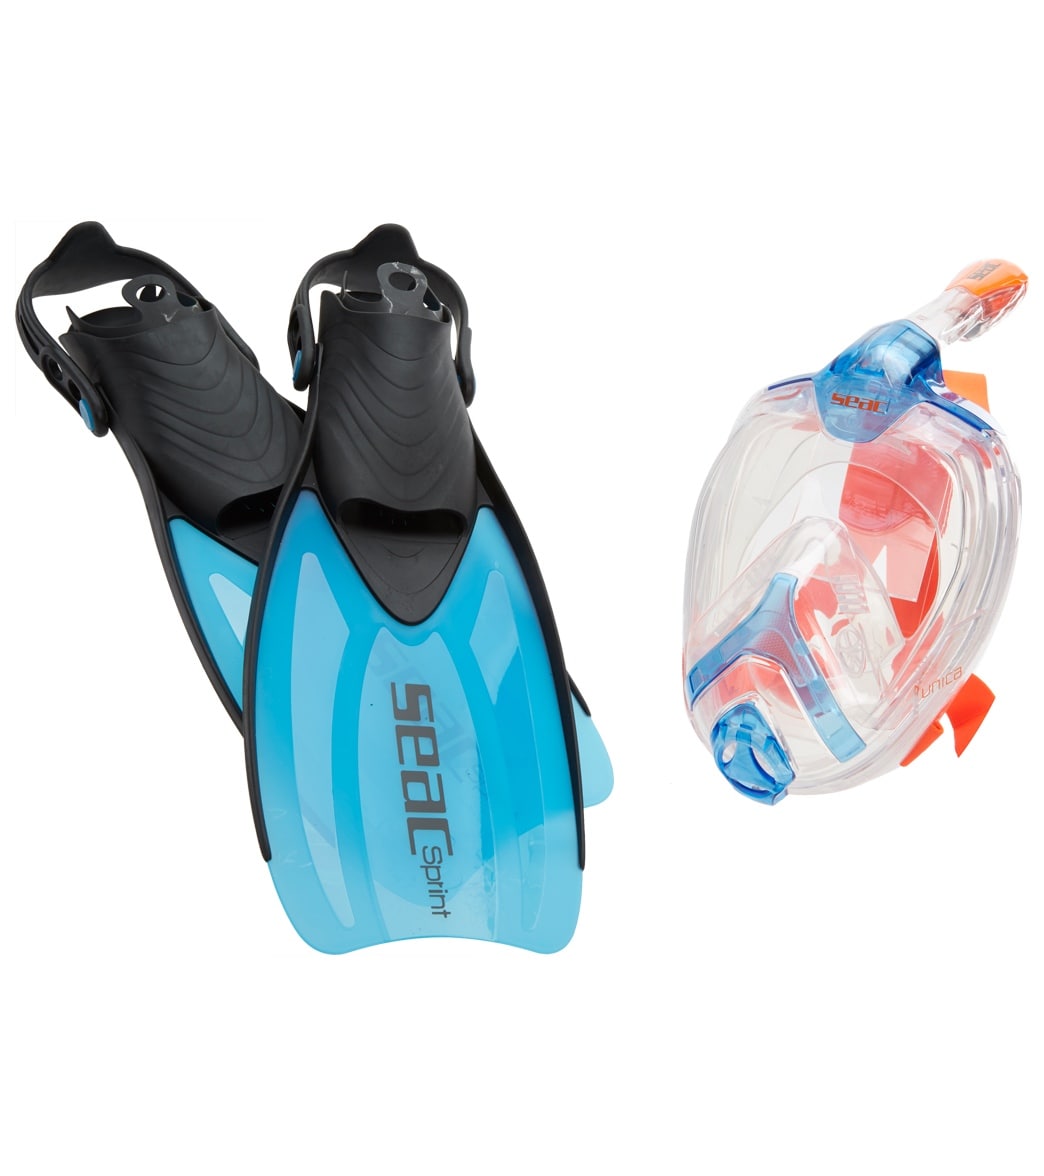 Seac Usa Unica Full Face Snorkeling Mask And Sprint Fin Set - Blue Large/Xl - Swimoutlet.com